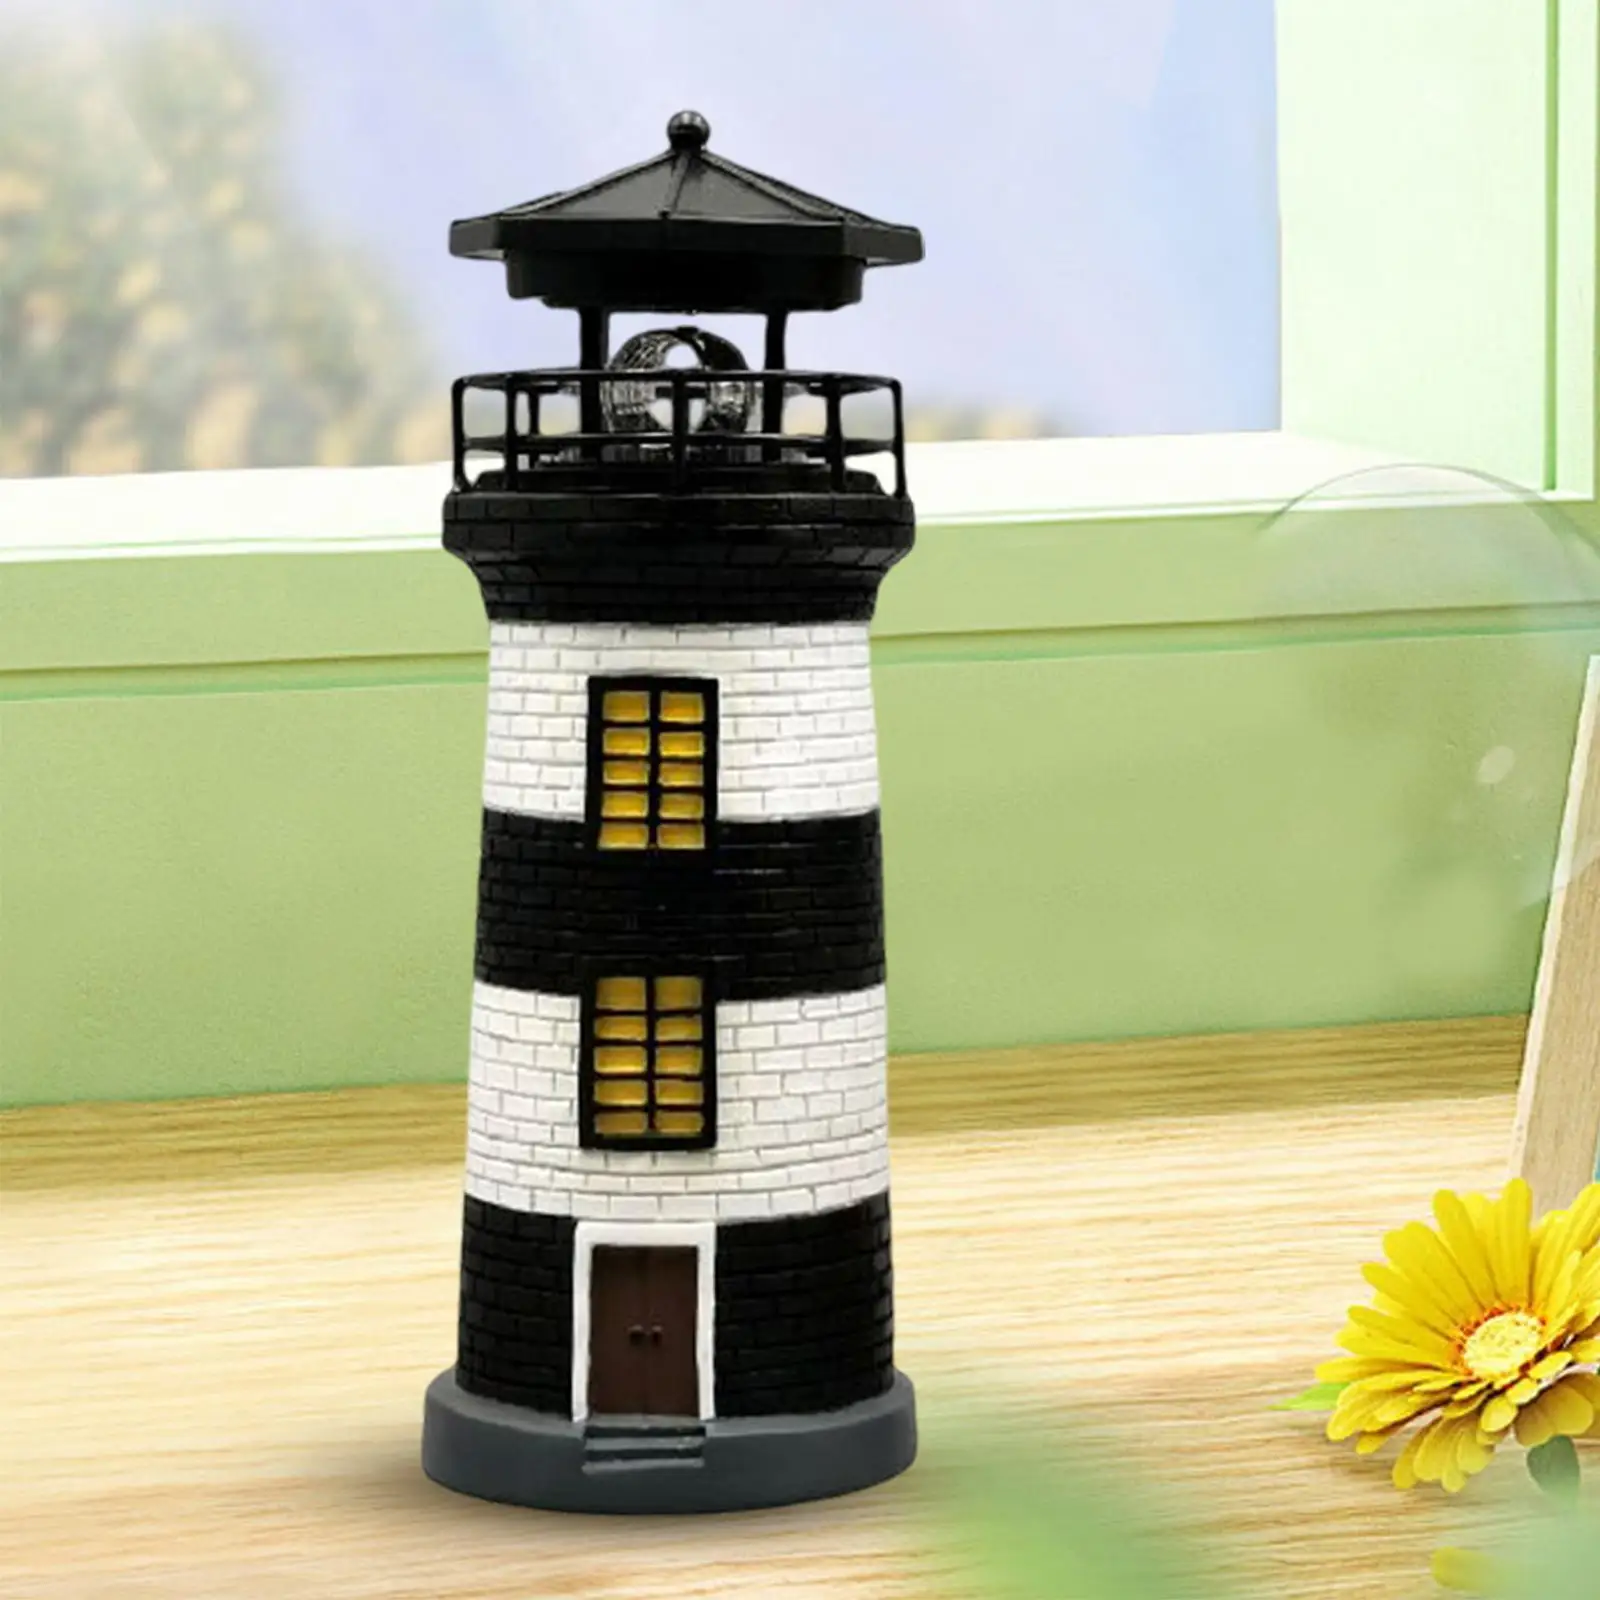 Windmill Solar Lighthouse Resin garden Lights Bright Waterproof for Lawn gift Courtyard Patio